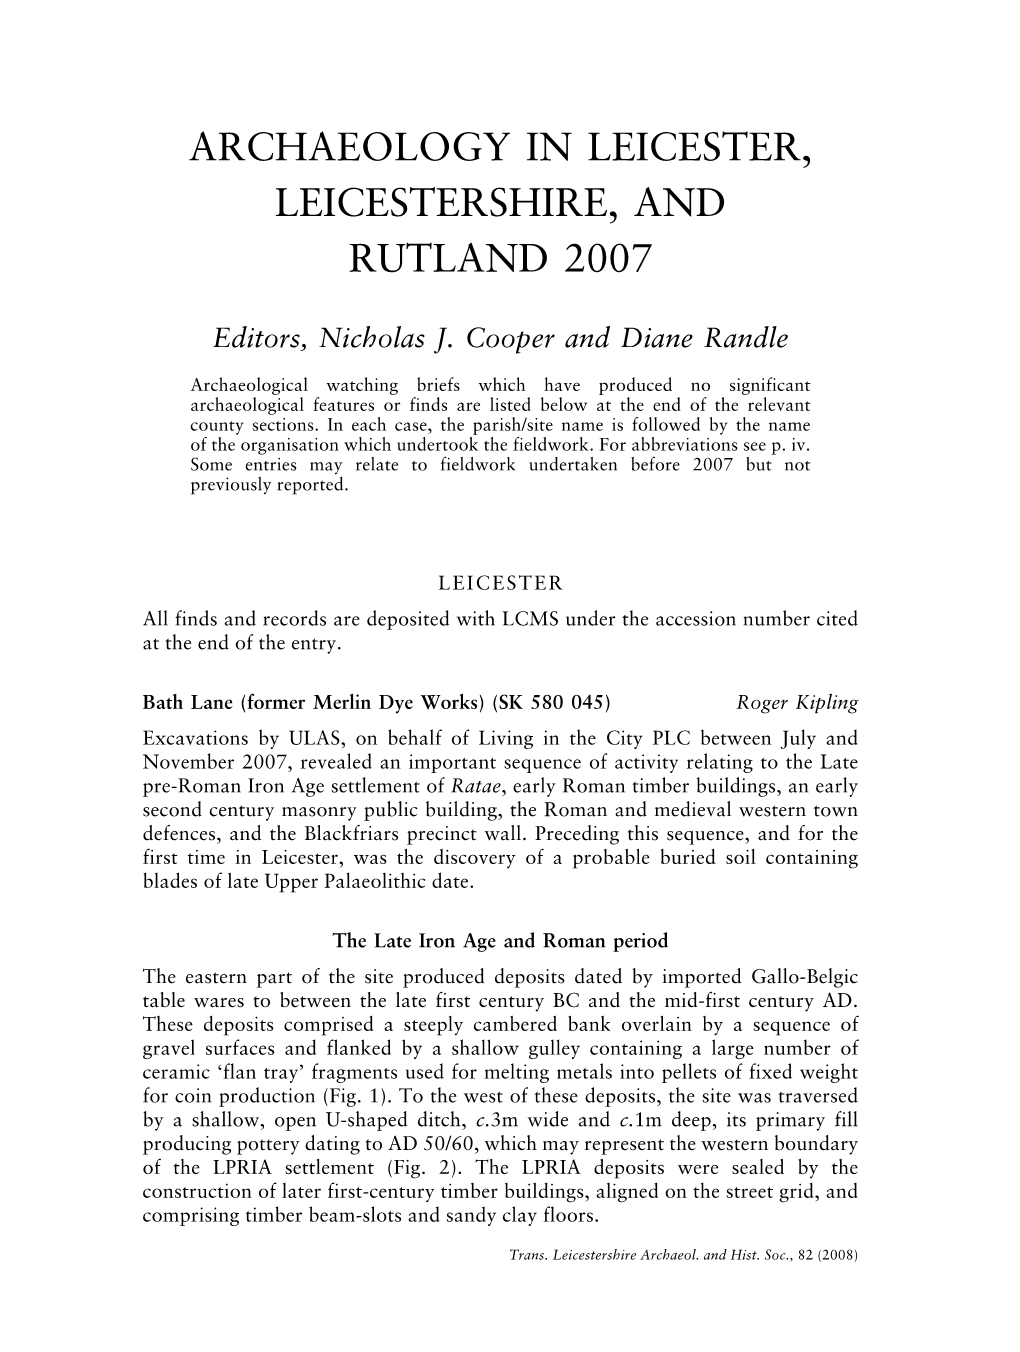 Archaeology in Leicestershire and Rutland 2007 Pp.275-298